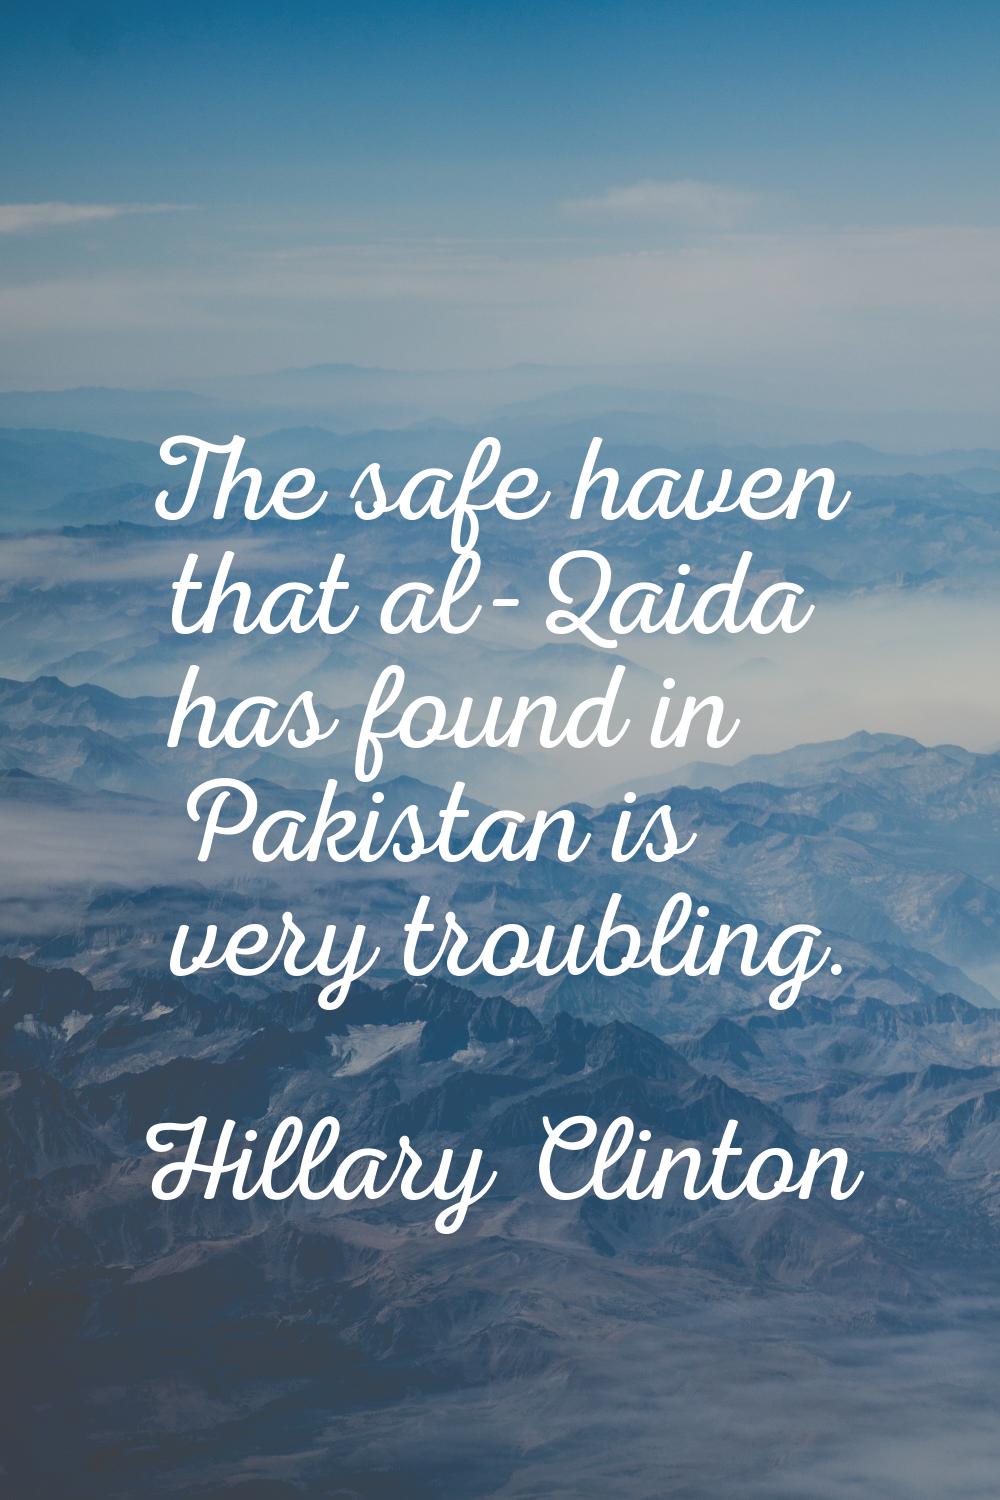 The safe haven that al-Qaida has found in Pakistan is very troubling.